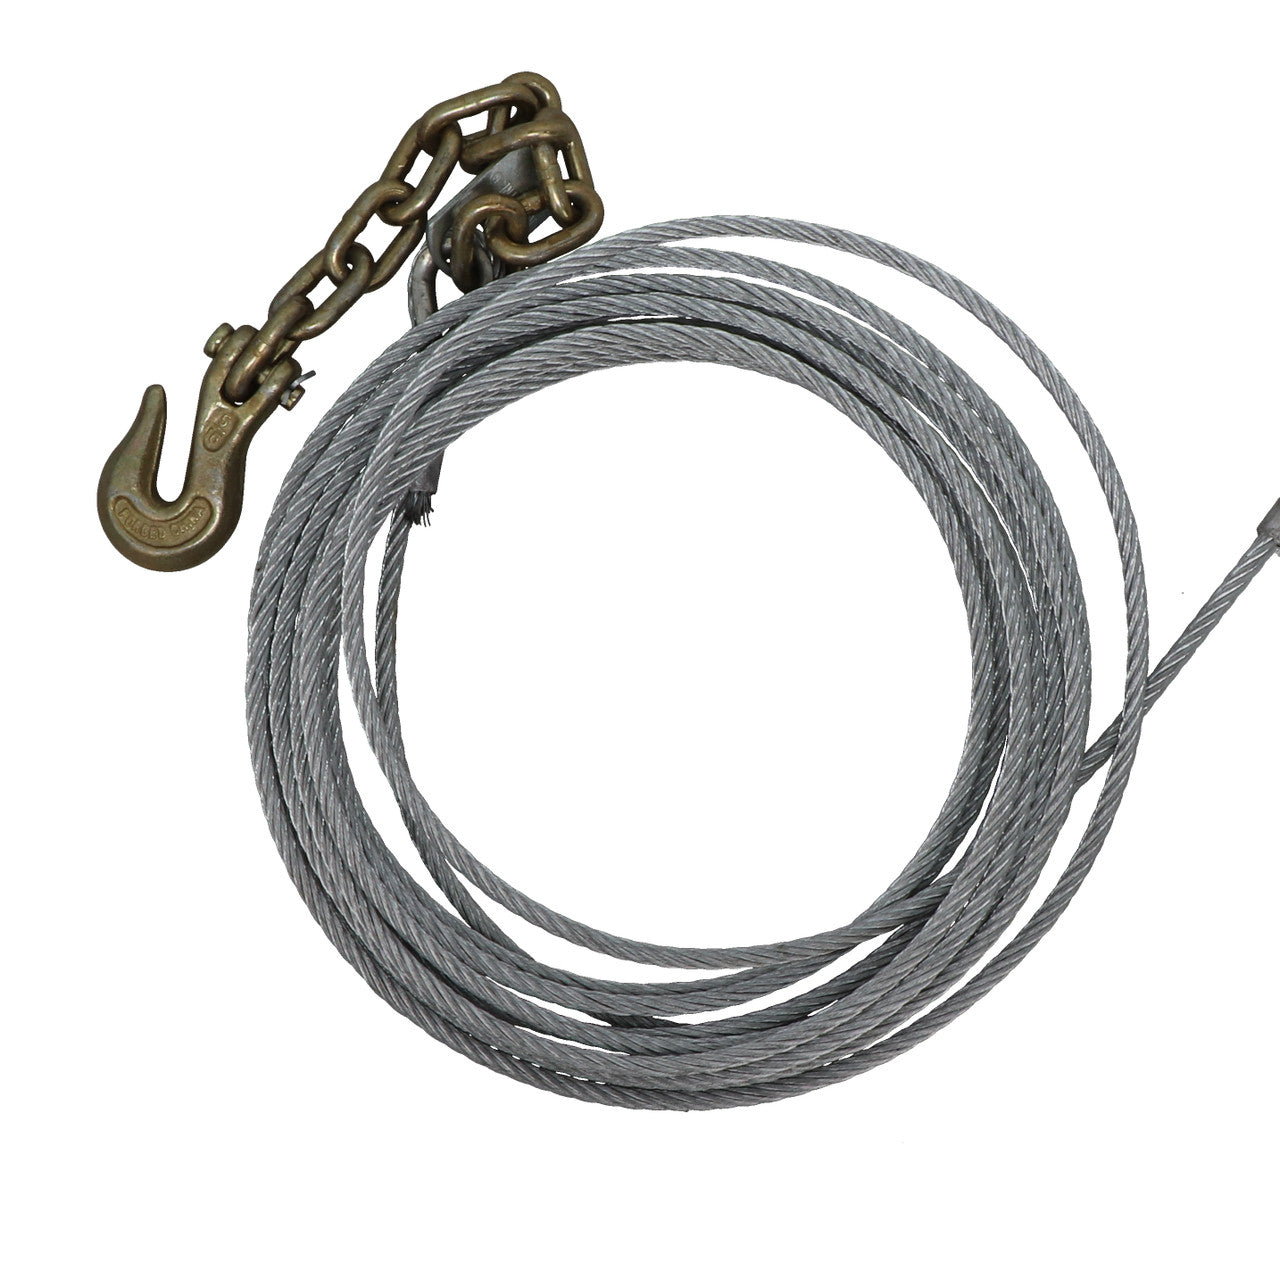 Kinedyne 5/16" by 30' Wire Rope Chain Assembly